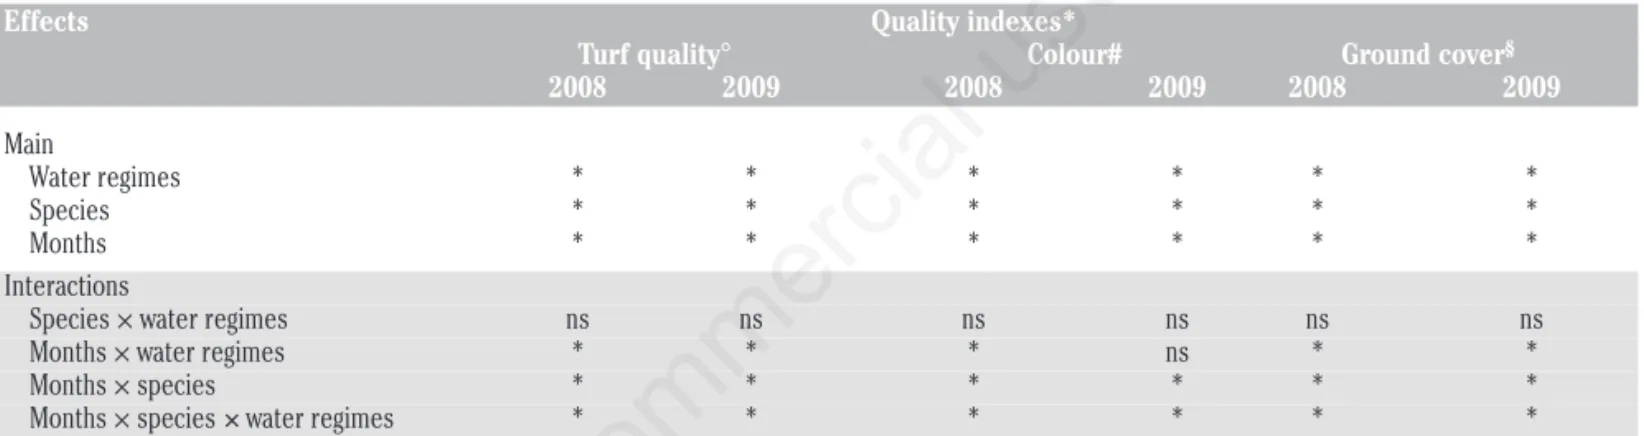 Table 4. Effect of water regimes on turf quality, ground cover and colour index in 2008 and 2009.